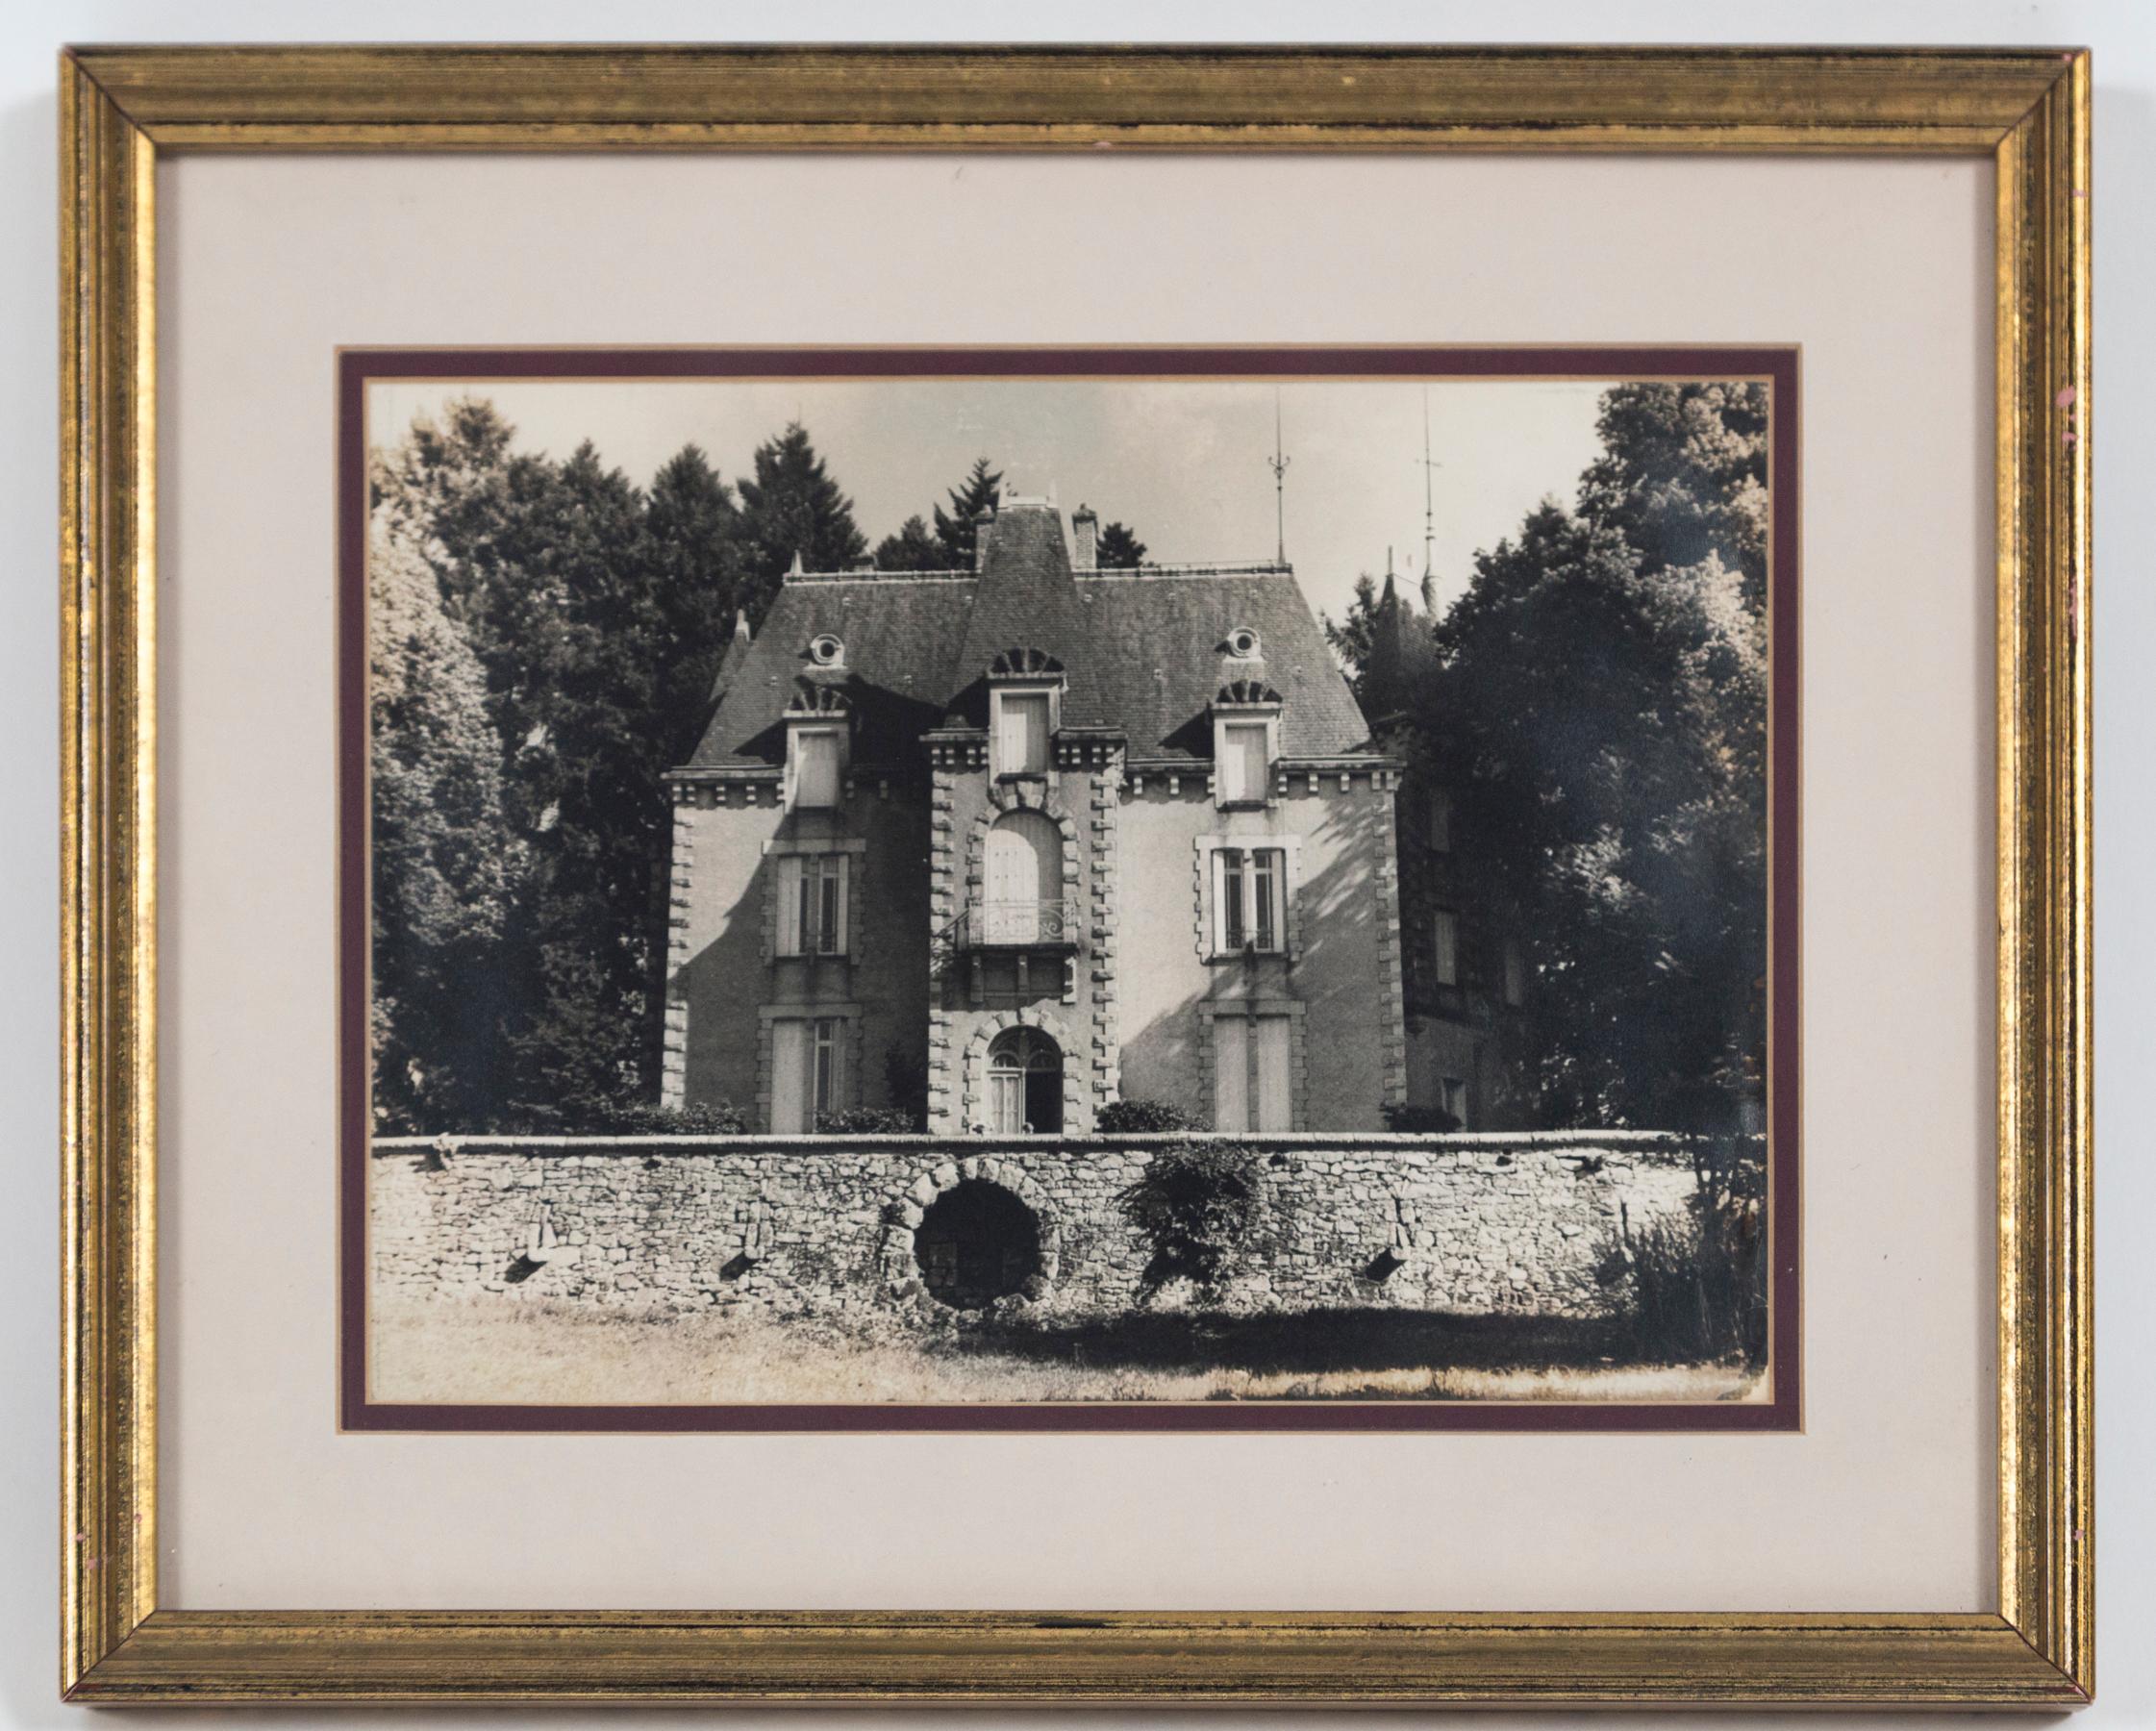 Vintage framed black and white photograph, Le Chateau, France, circa 1950's. A charming image of a chateau in the French countryside. Professionally framed and matted. Provenance: Estate of Janine Metz, social secretary to the Duchess of Windsor in